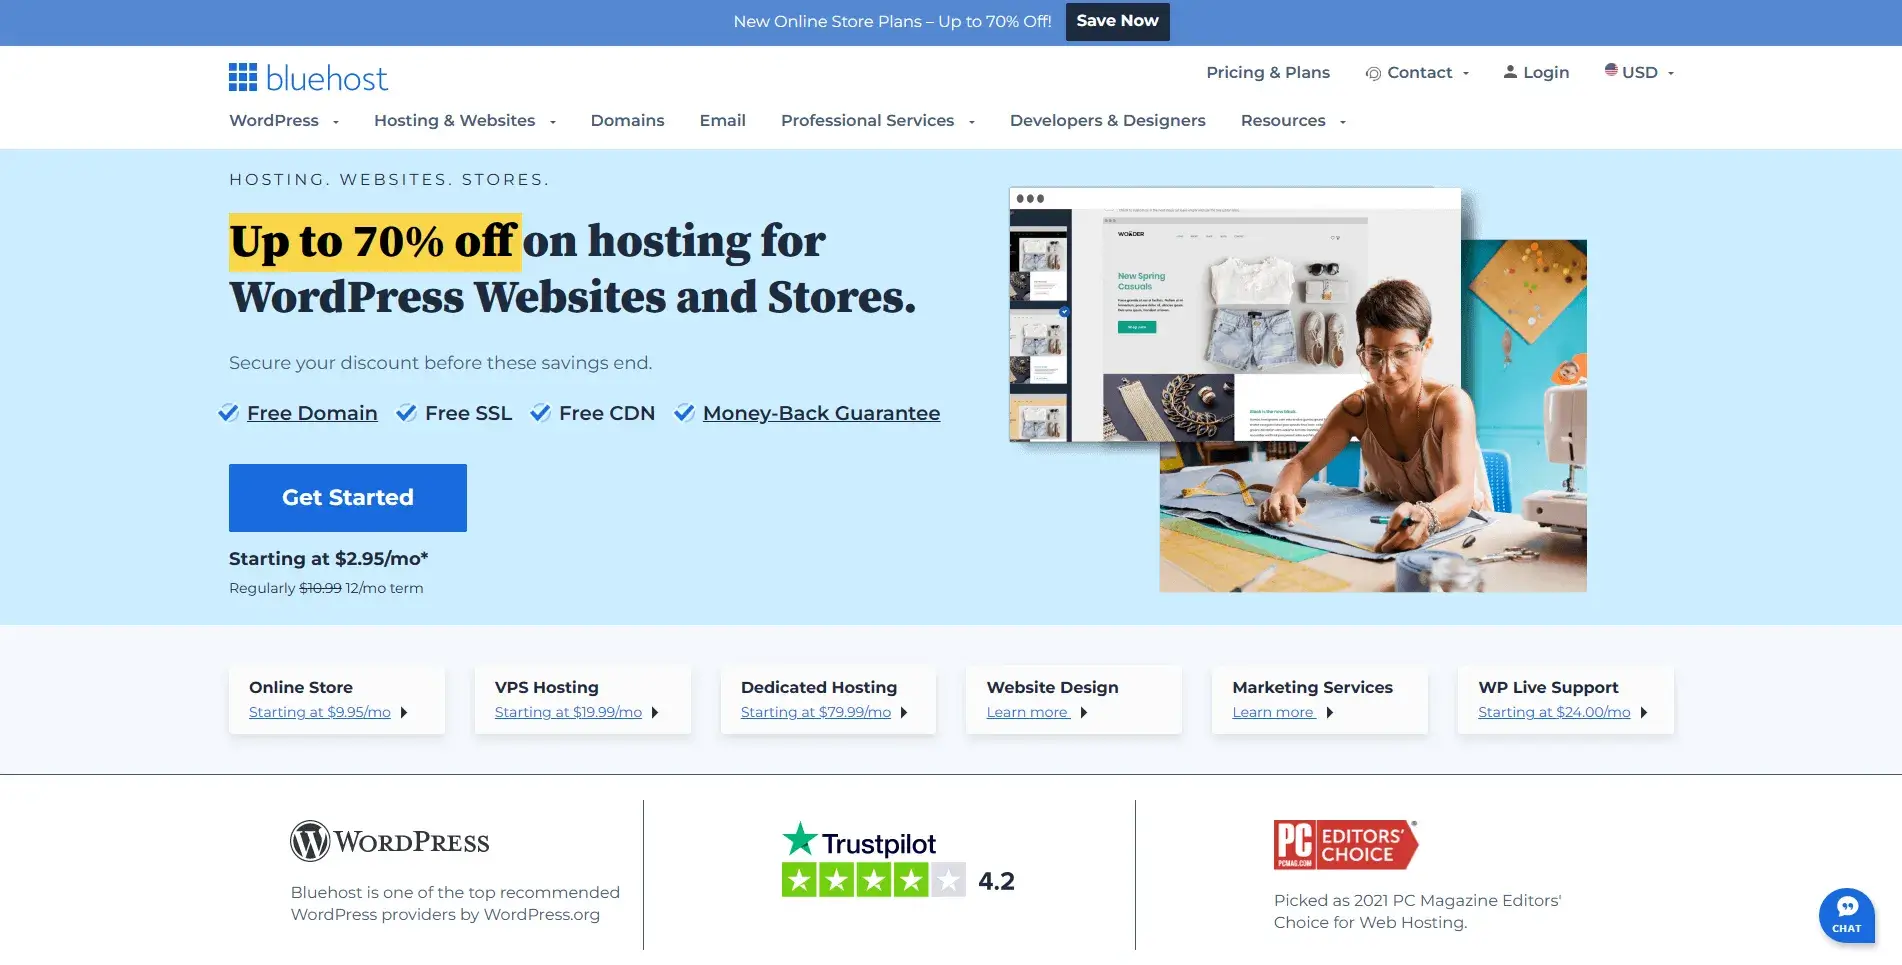 Products to Review: Bluehost Web Hosting